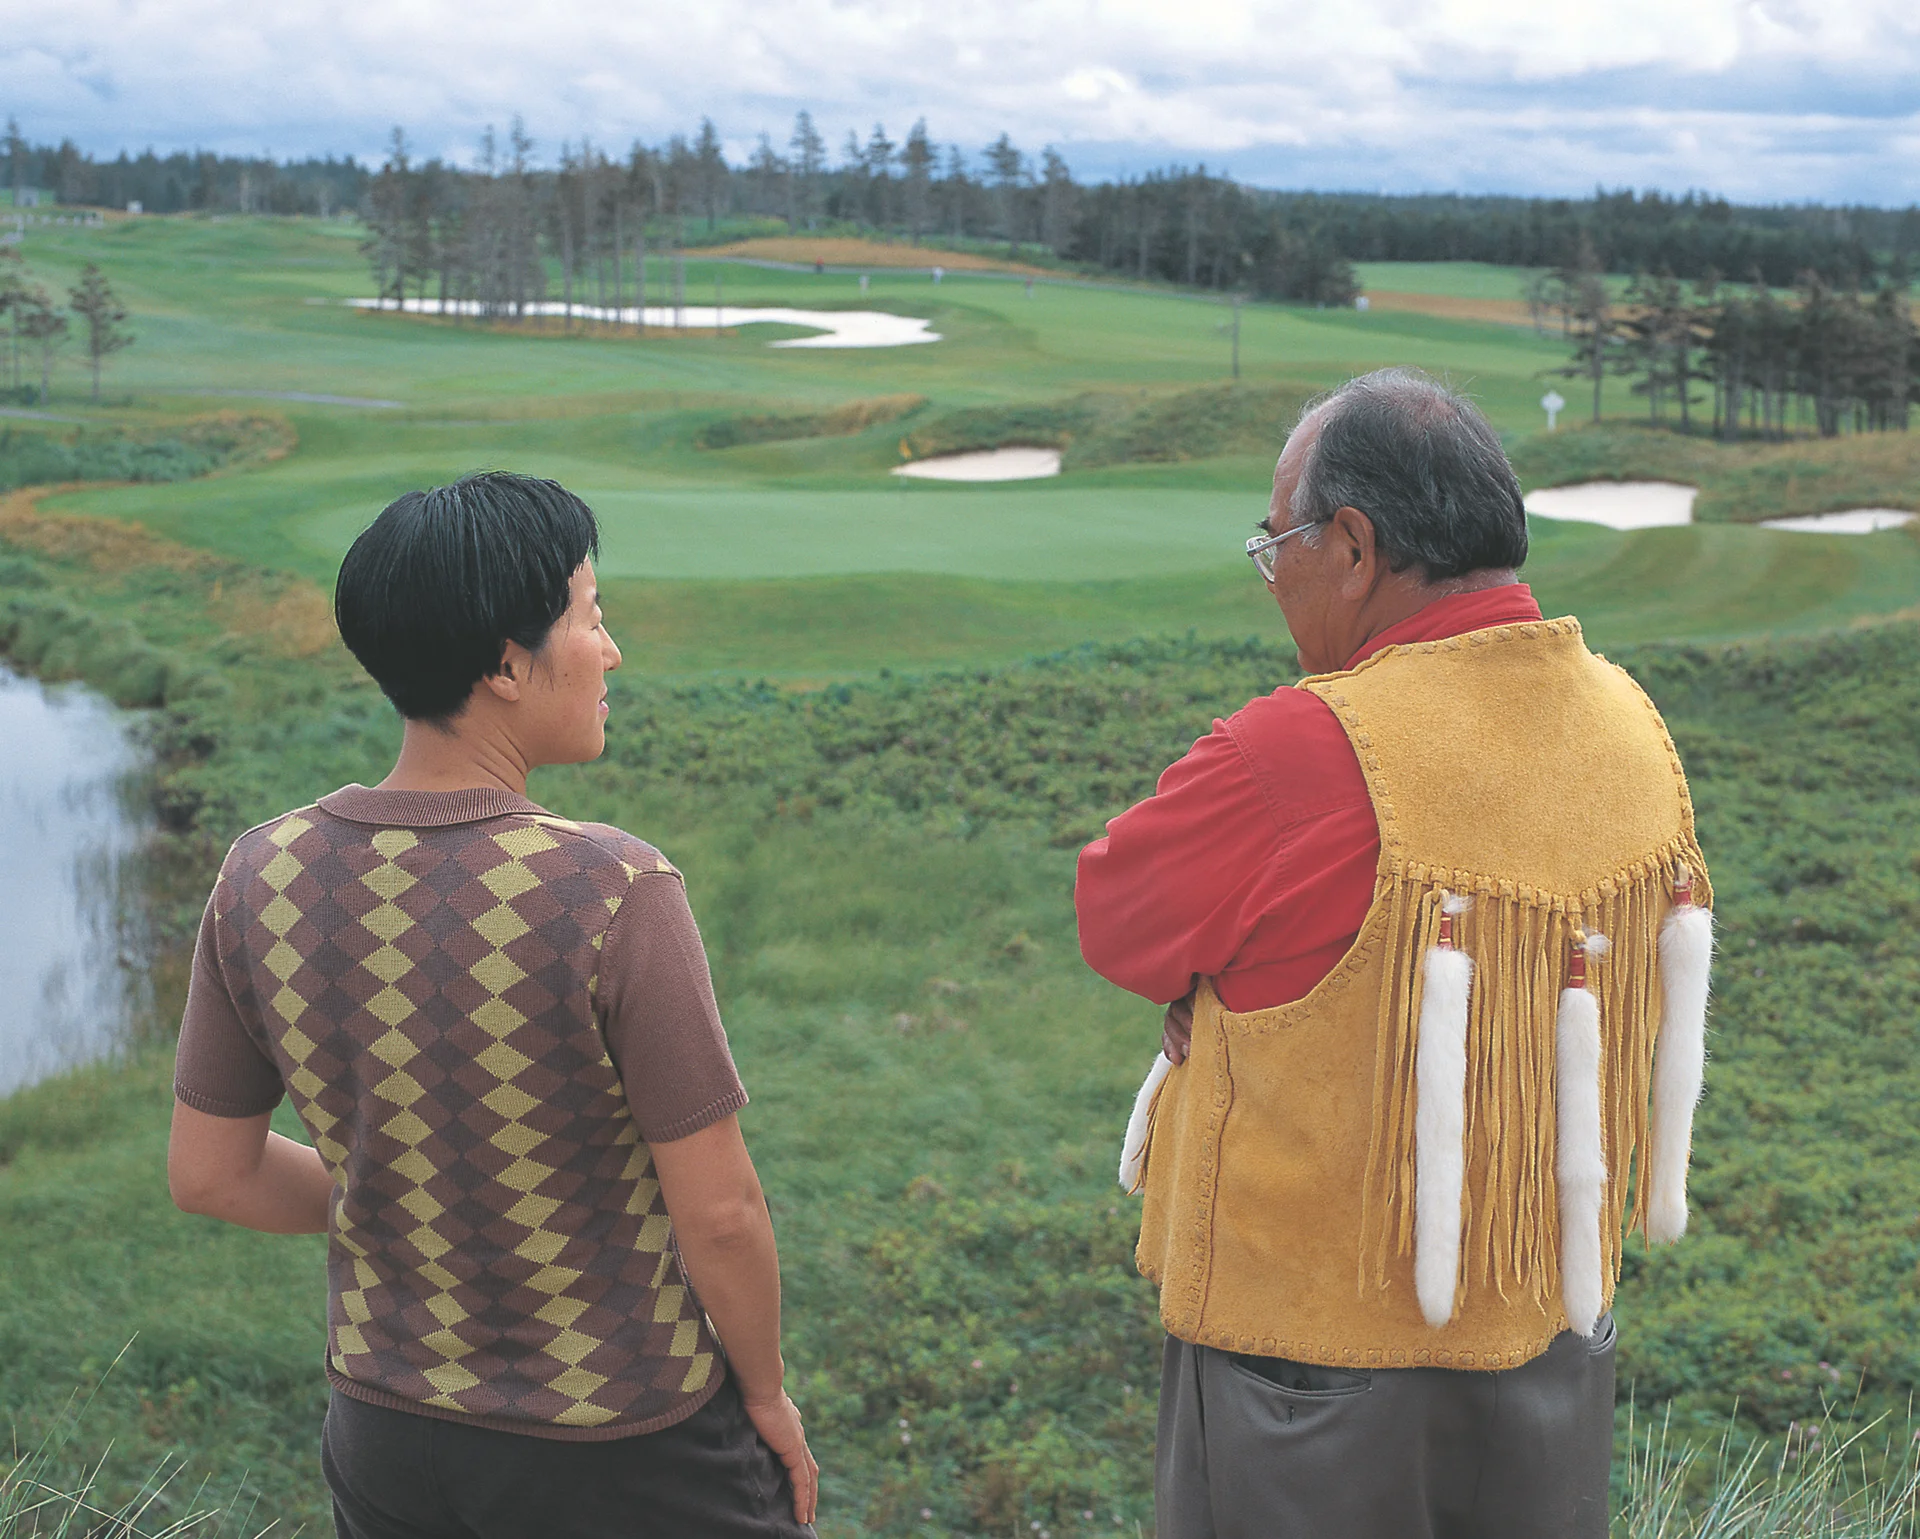 Two figures standing in front of a golf course with their backs to the camera